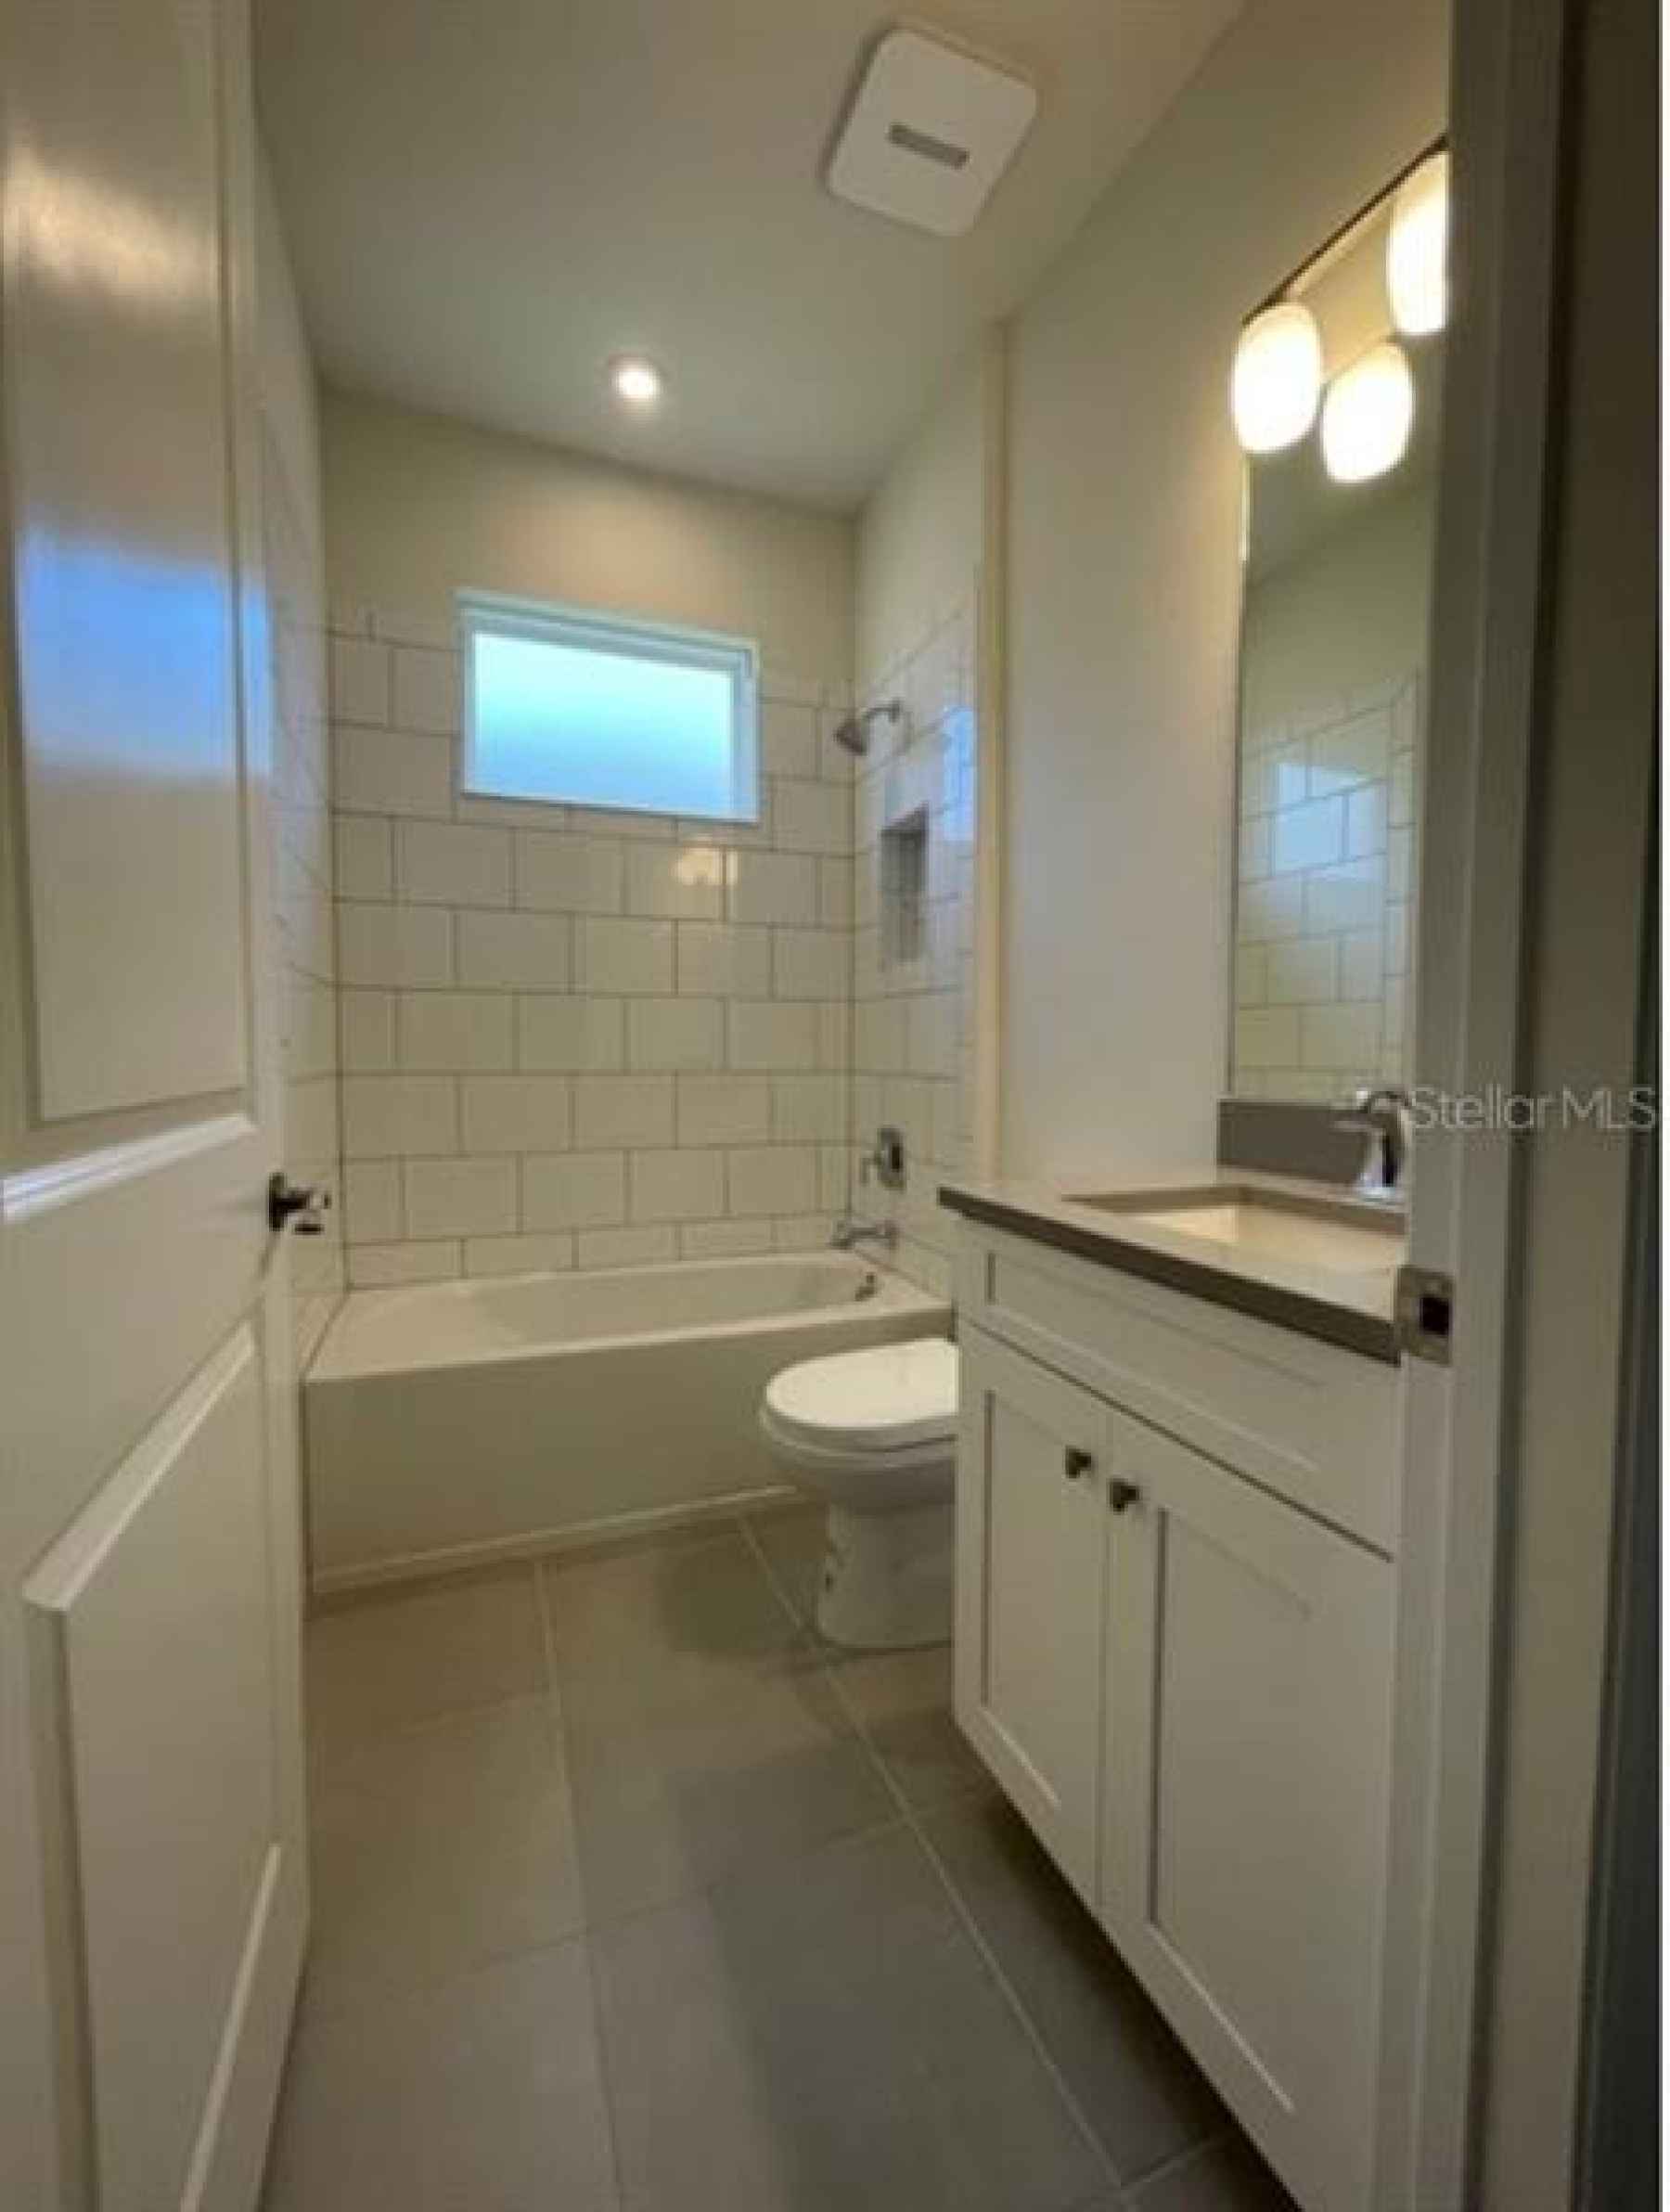 This stylish bathroom is perfect for guests and will be perfect for getting ready in the mornings!